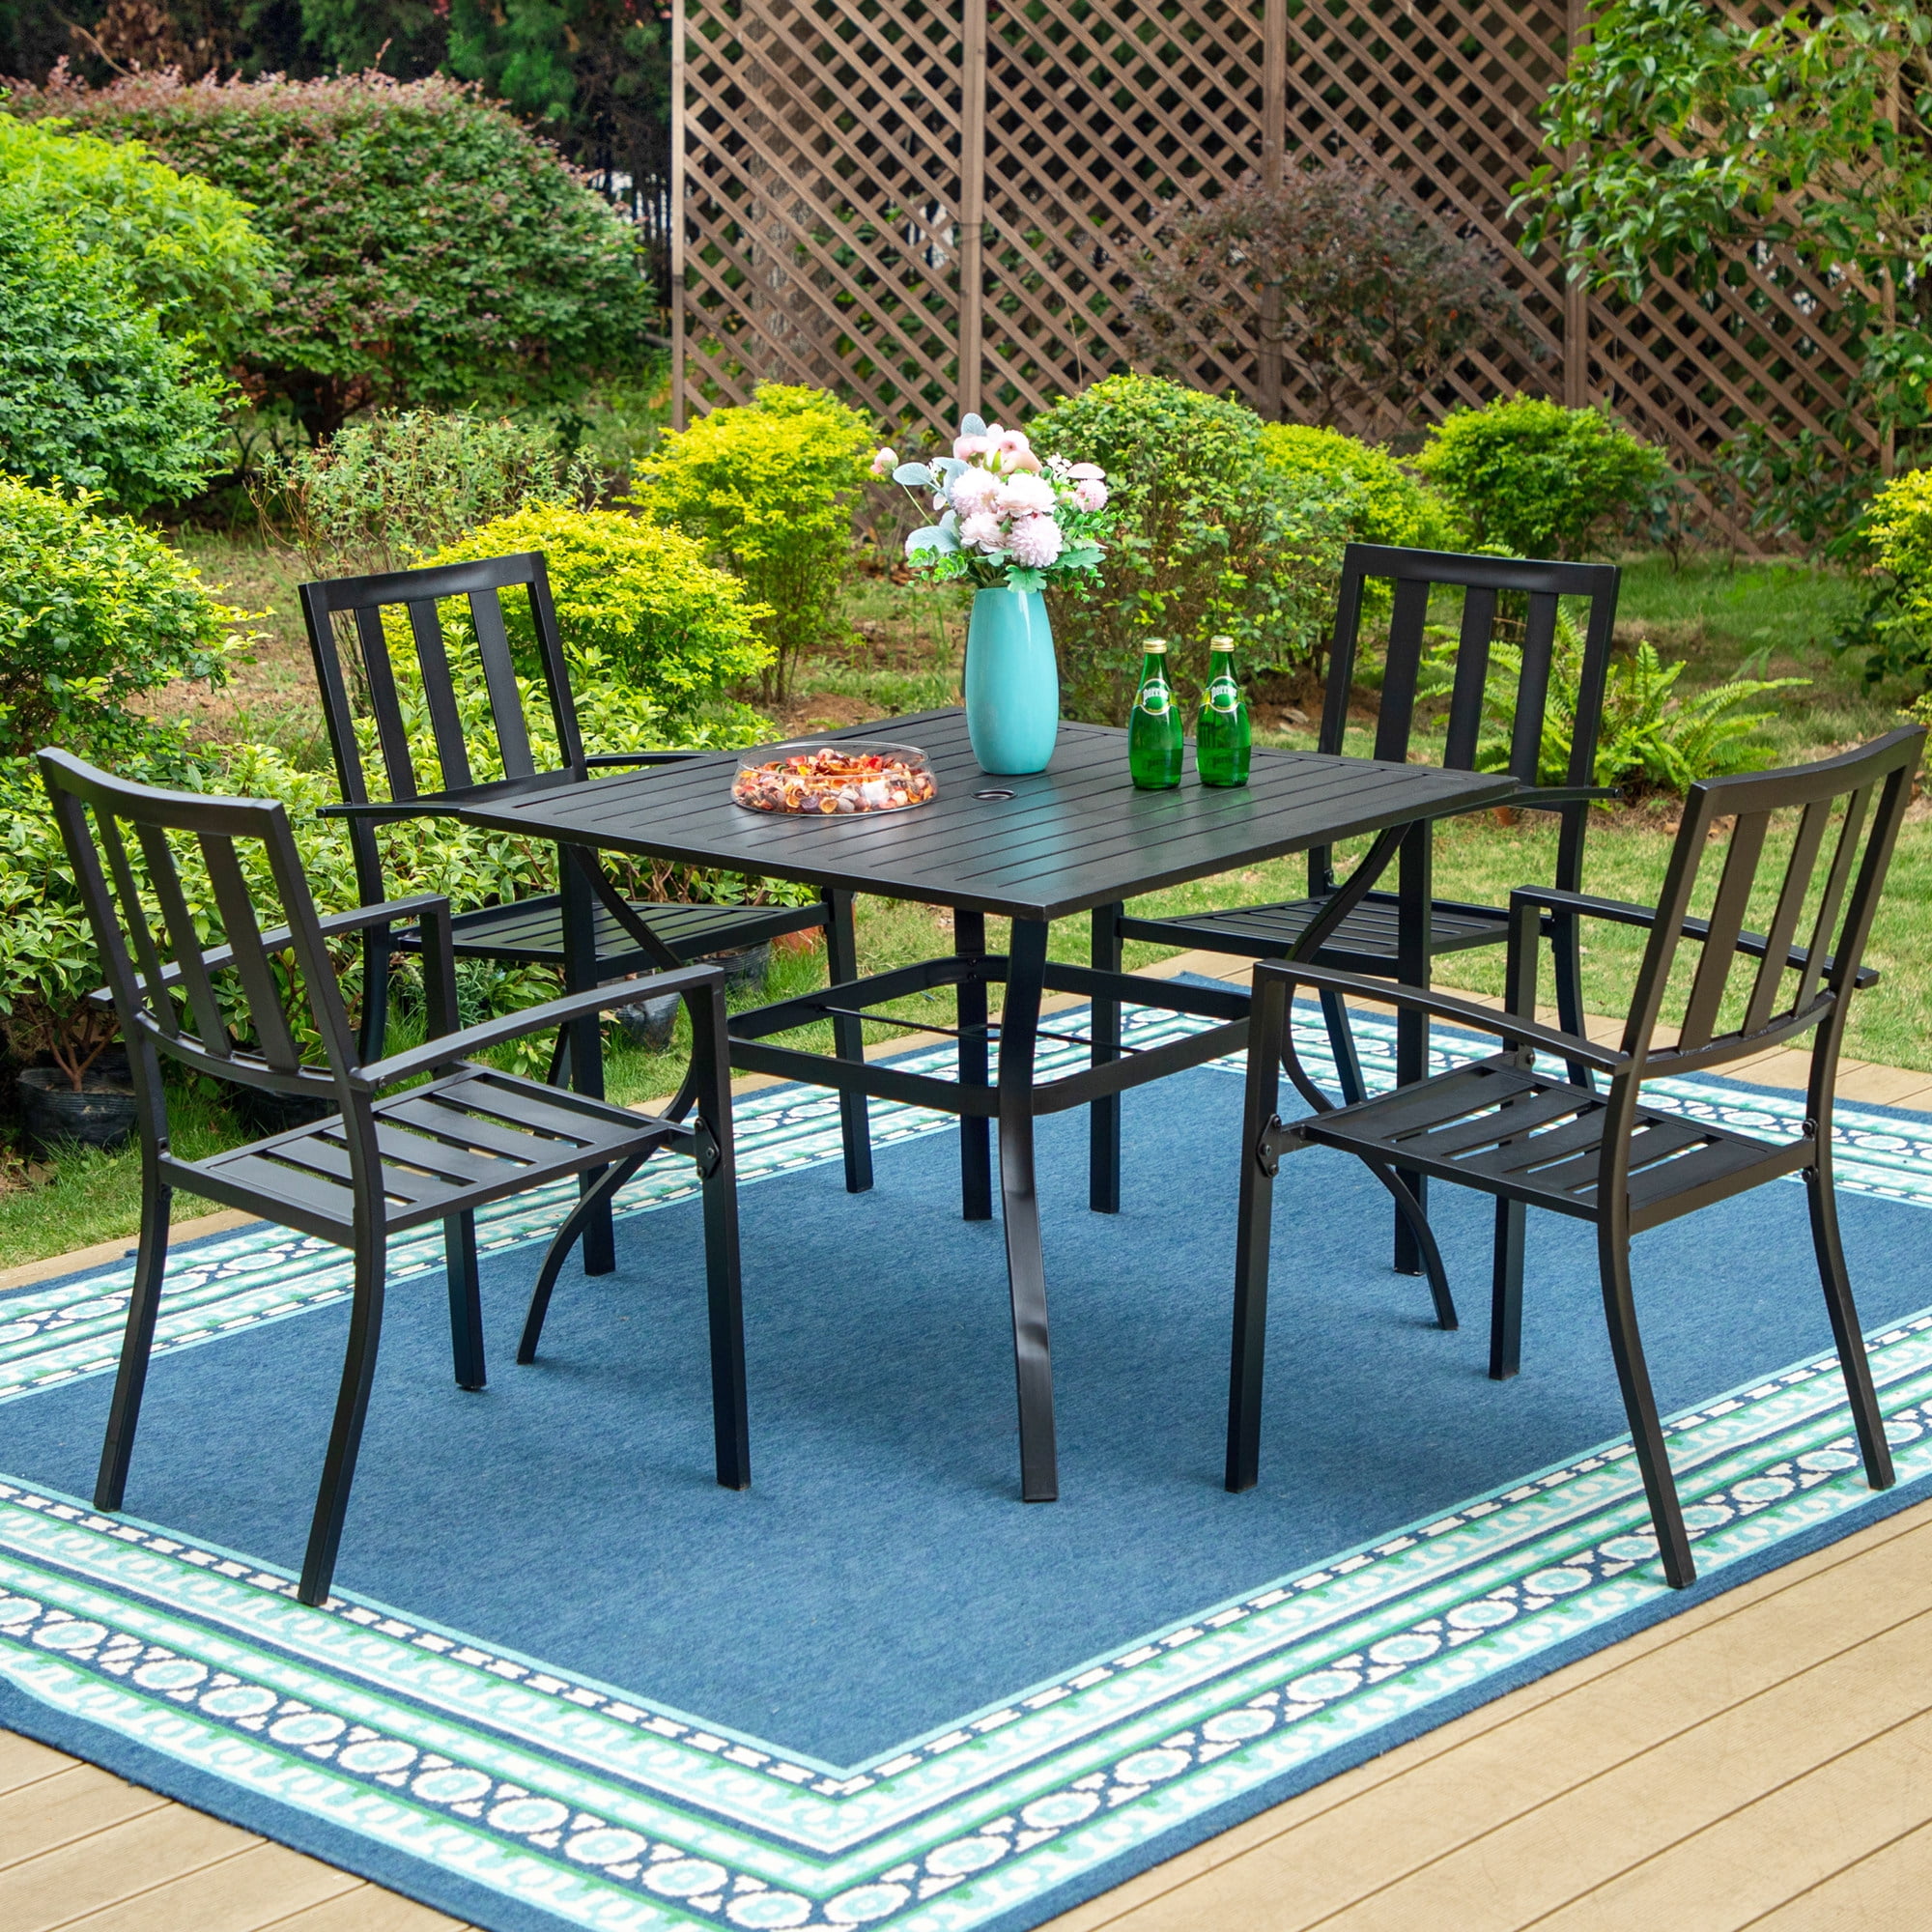 Black Outdoor Garden Patio Table Chair Set Furniture Large Waterproof Cover S5P4 